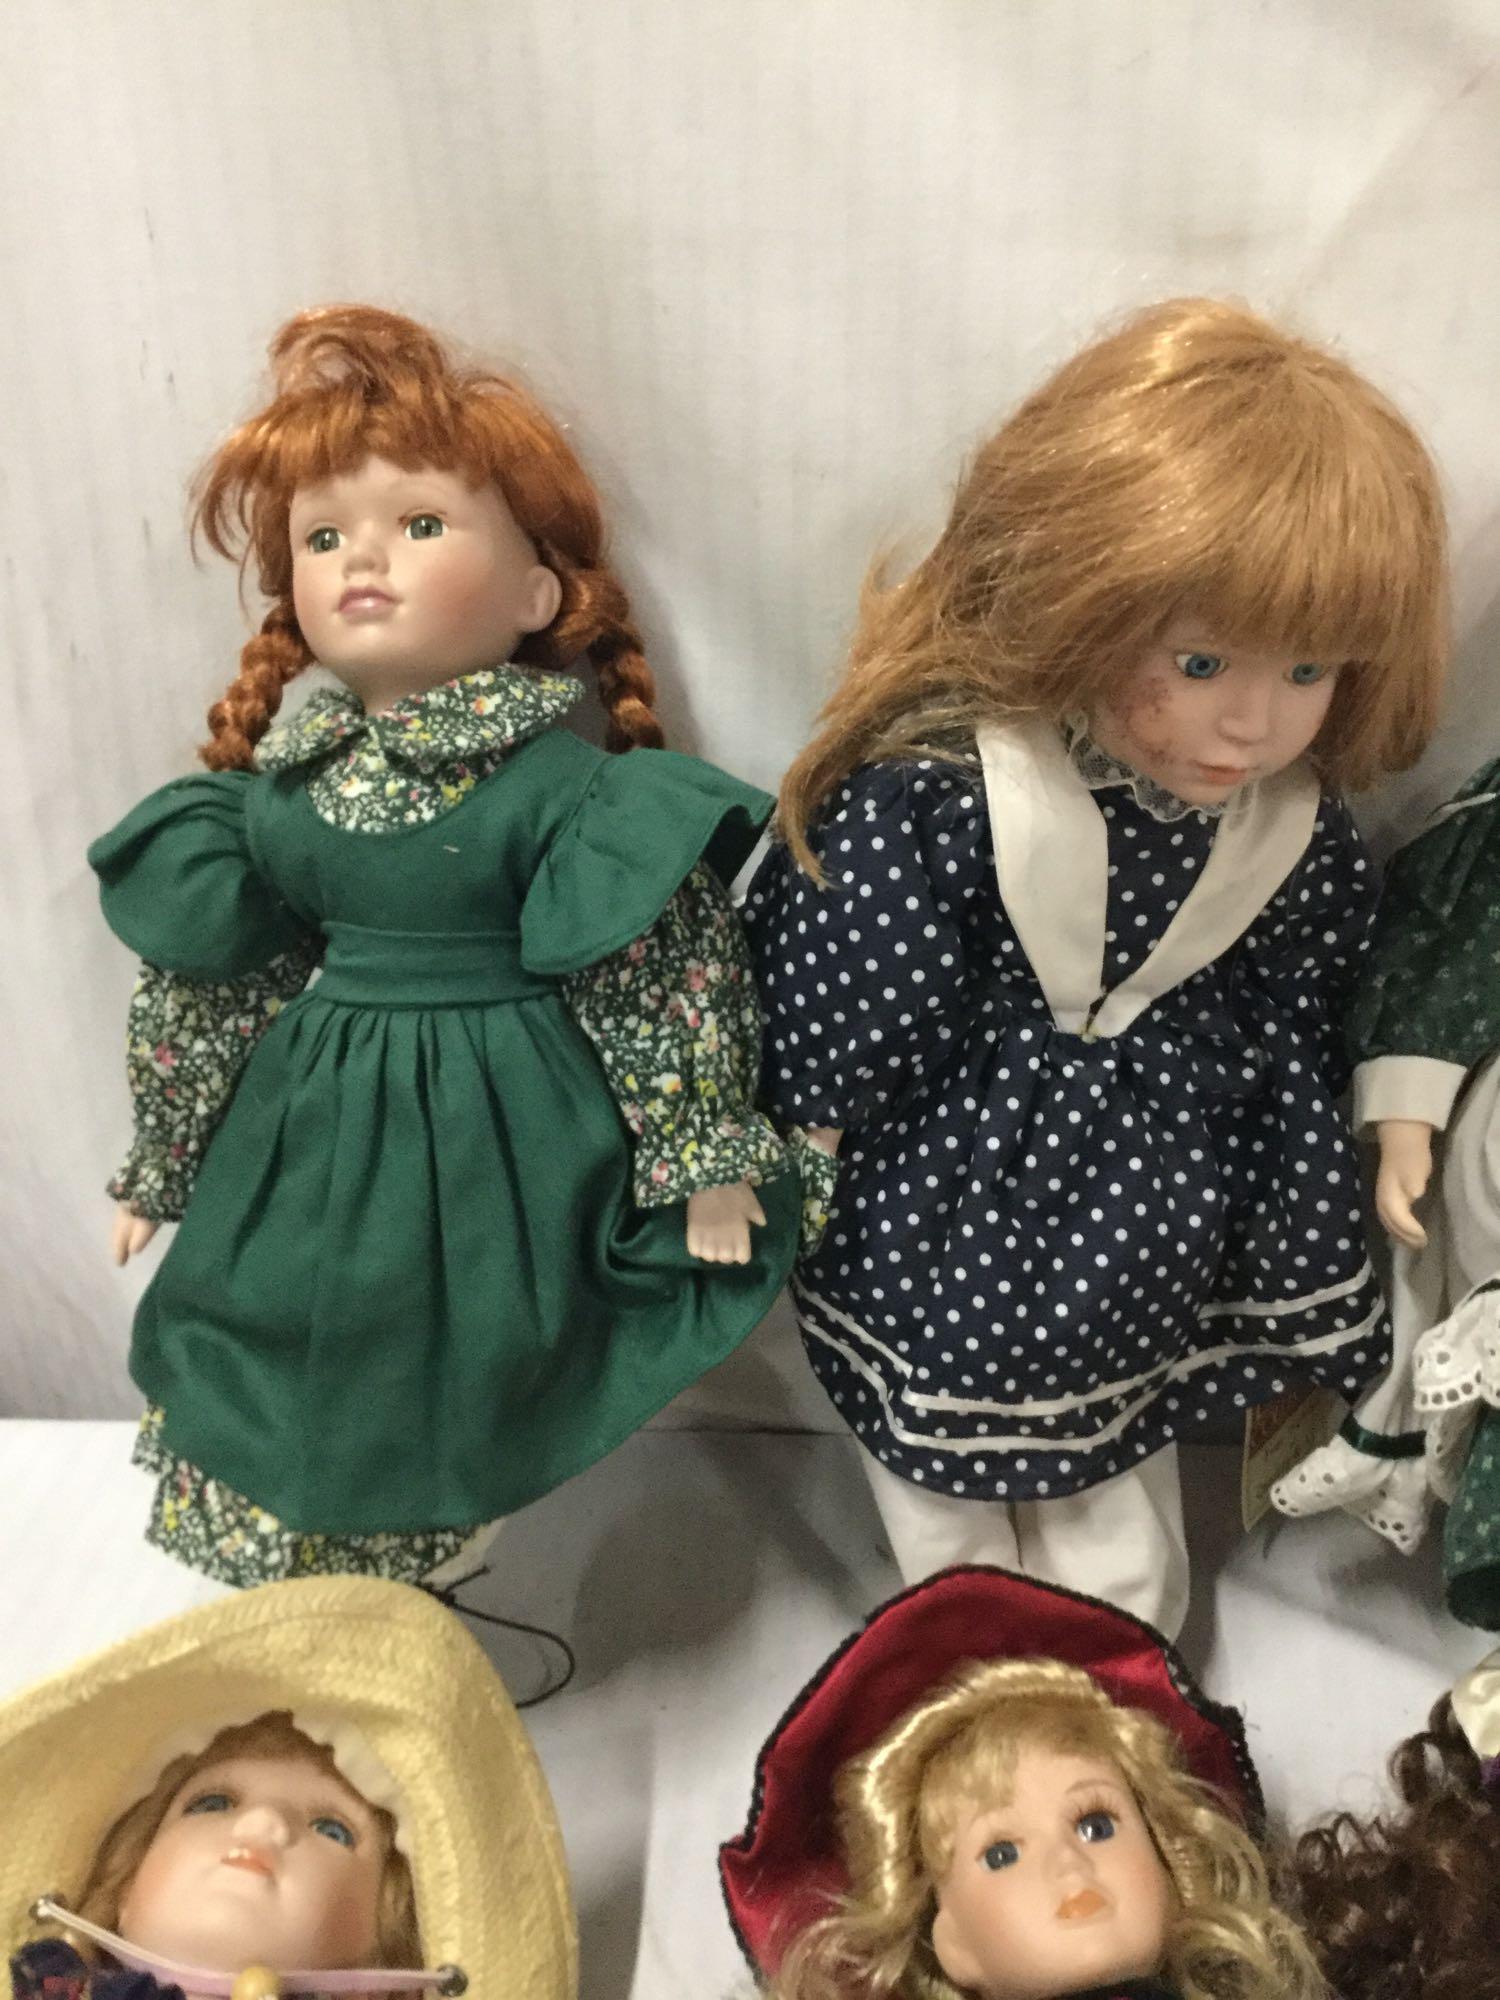 10x composite and porcelain dolls. Dynasty doll, heritage Mint and more. Largest doll measures